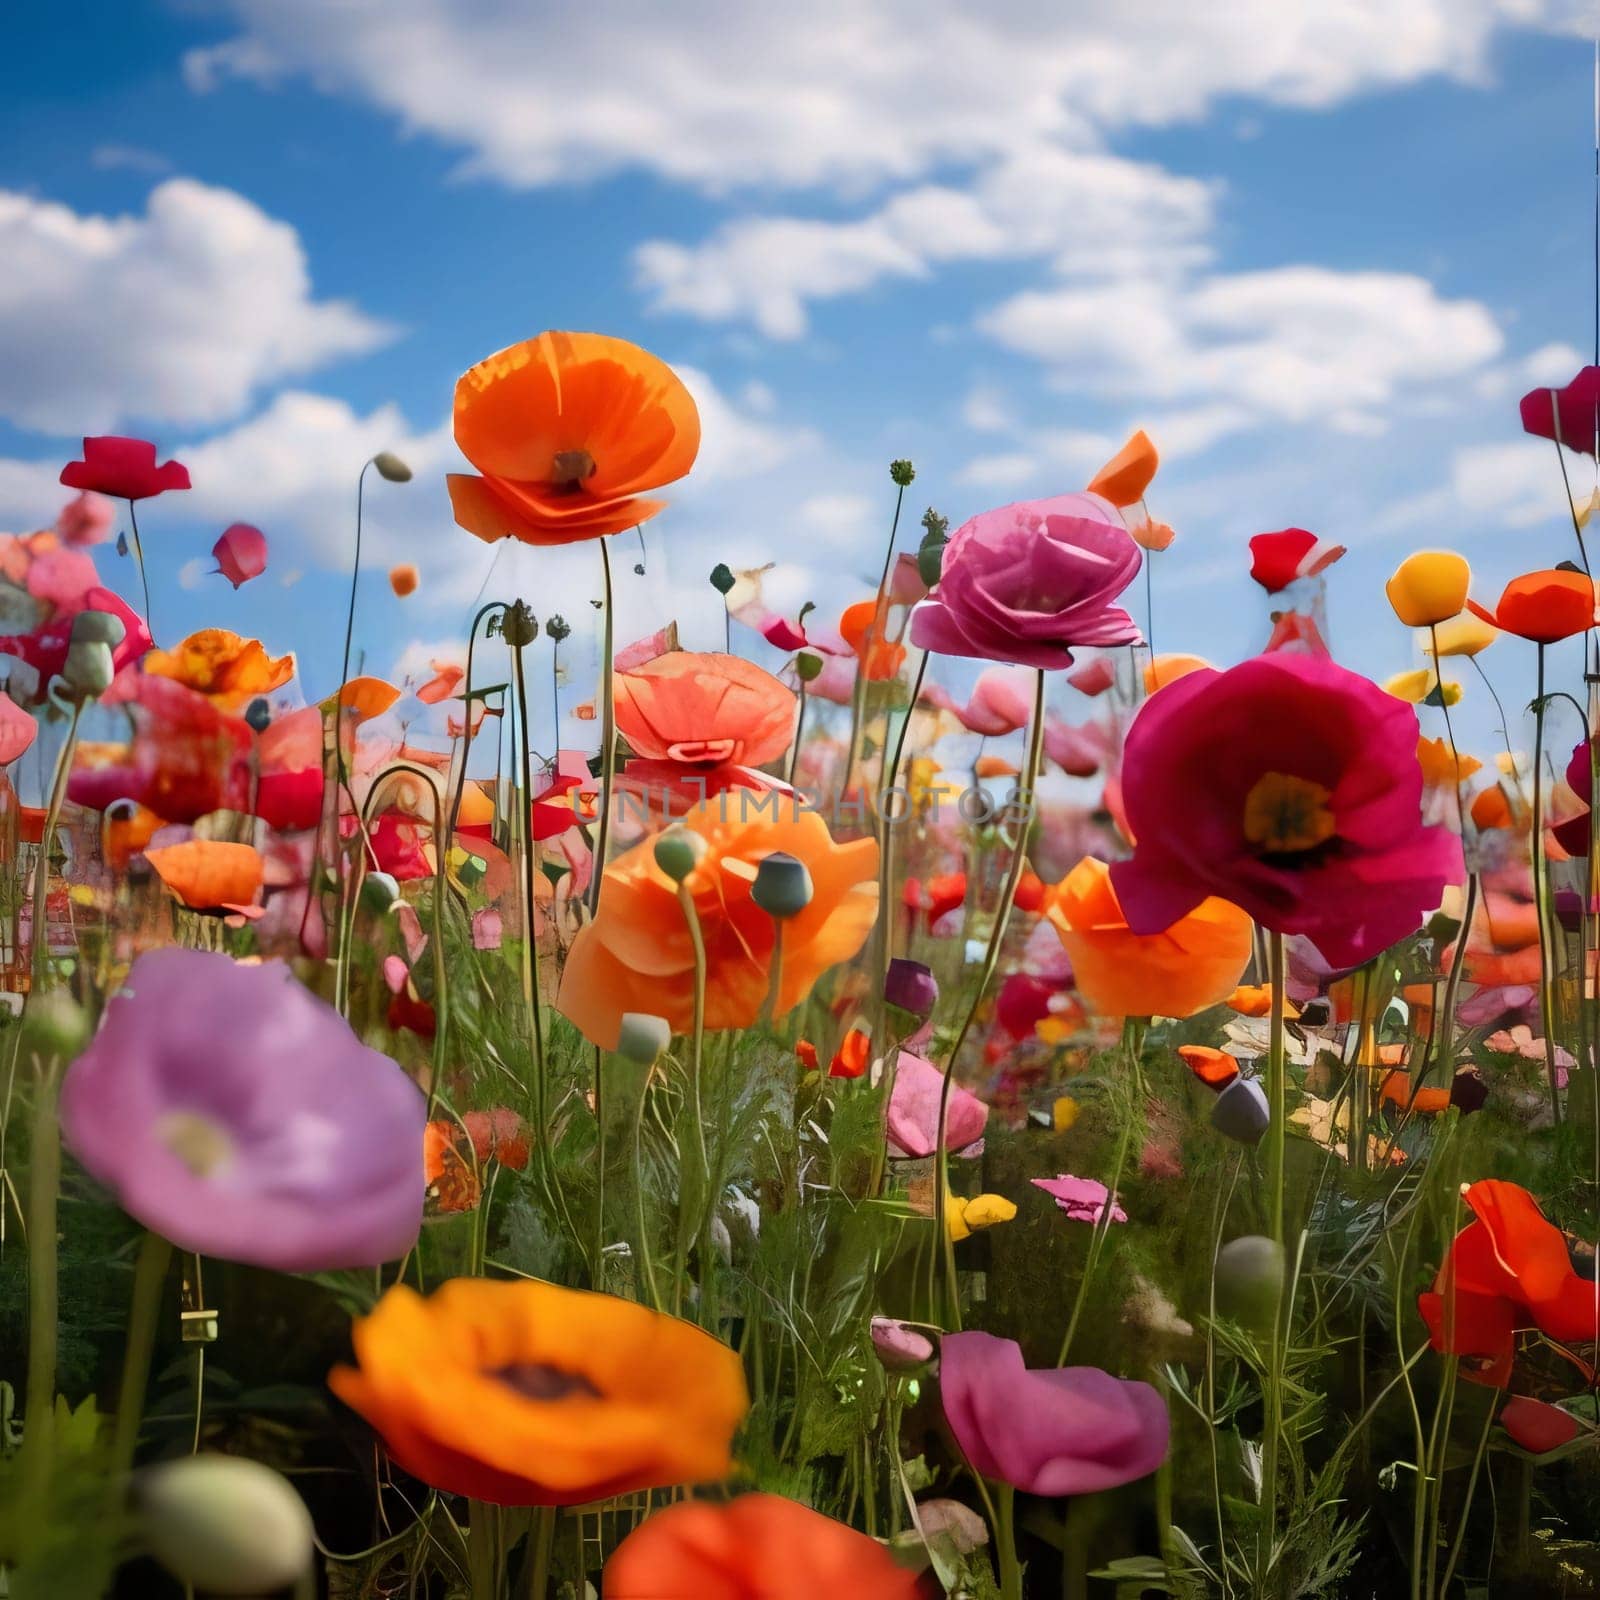 Colorful flowers of poppies in the field, meadow, clearing, at the top of the clouds. Flowering flowers, a symbol of spring, new life. A joyful time of nature waking up to life.